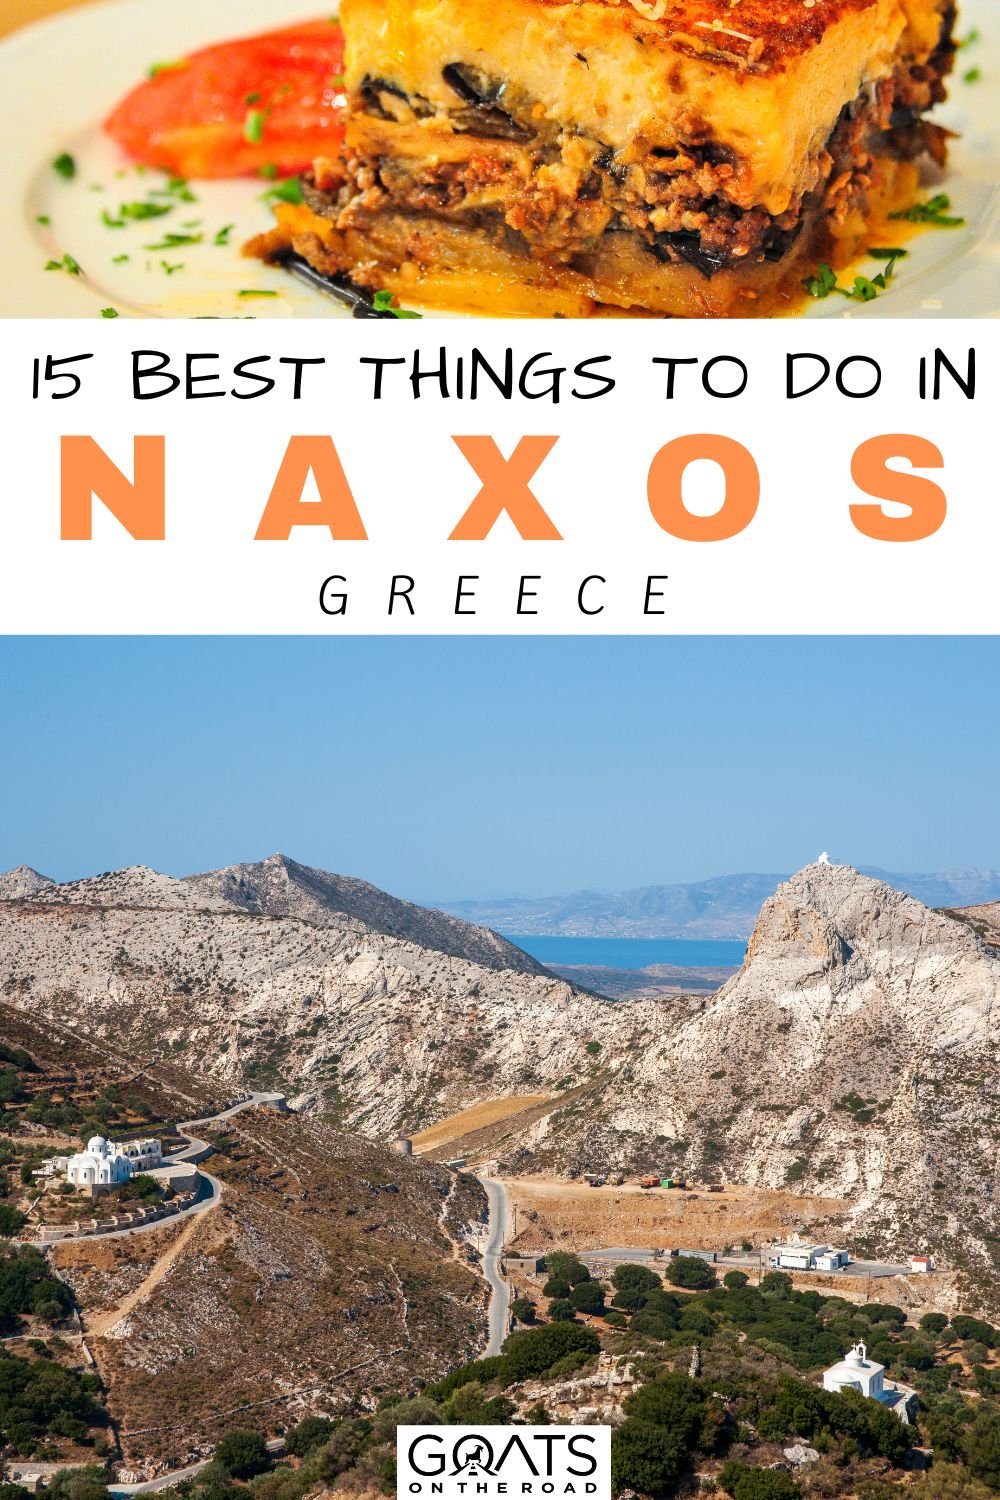 “15 Best Things To Do in Naxos, Greece